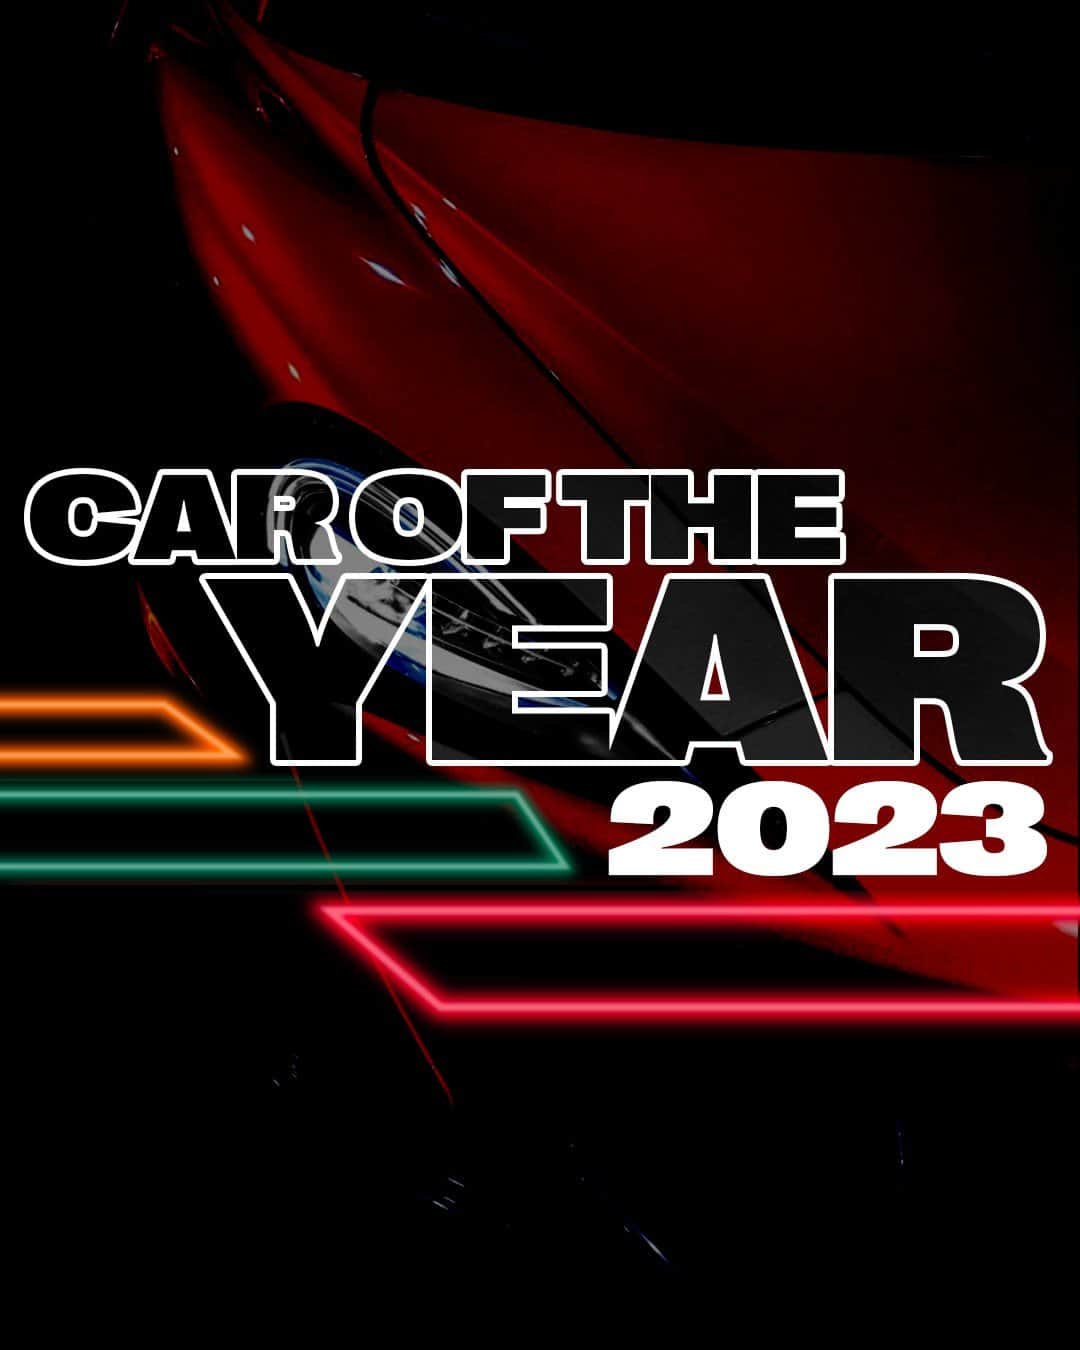 7-Eleven USAのインスタグラム：「Say hello to your 12 nominees for the 2023 Car of the Year. Get ready to vote for your pick in IG stories over the next few days! #CarsOf7ELEVEn    LIMIT 1 VOTE PER PERSON PER MATCH-UP. US/DC Voters only; 16+. See Voting Terms for full details; link in bio.  @chris.carsfl @bryann_zilla @chasekopsch @kianothekidb @d0m_59 @trail_bauce @_frj15 @luna4is @cosmos.captures @miguelthejedi @neonufo @ryanfriedmanmotorcars」